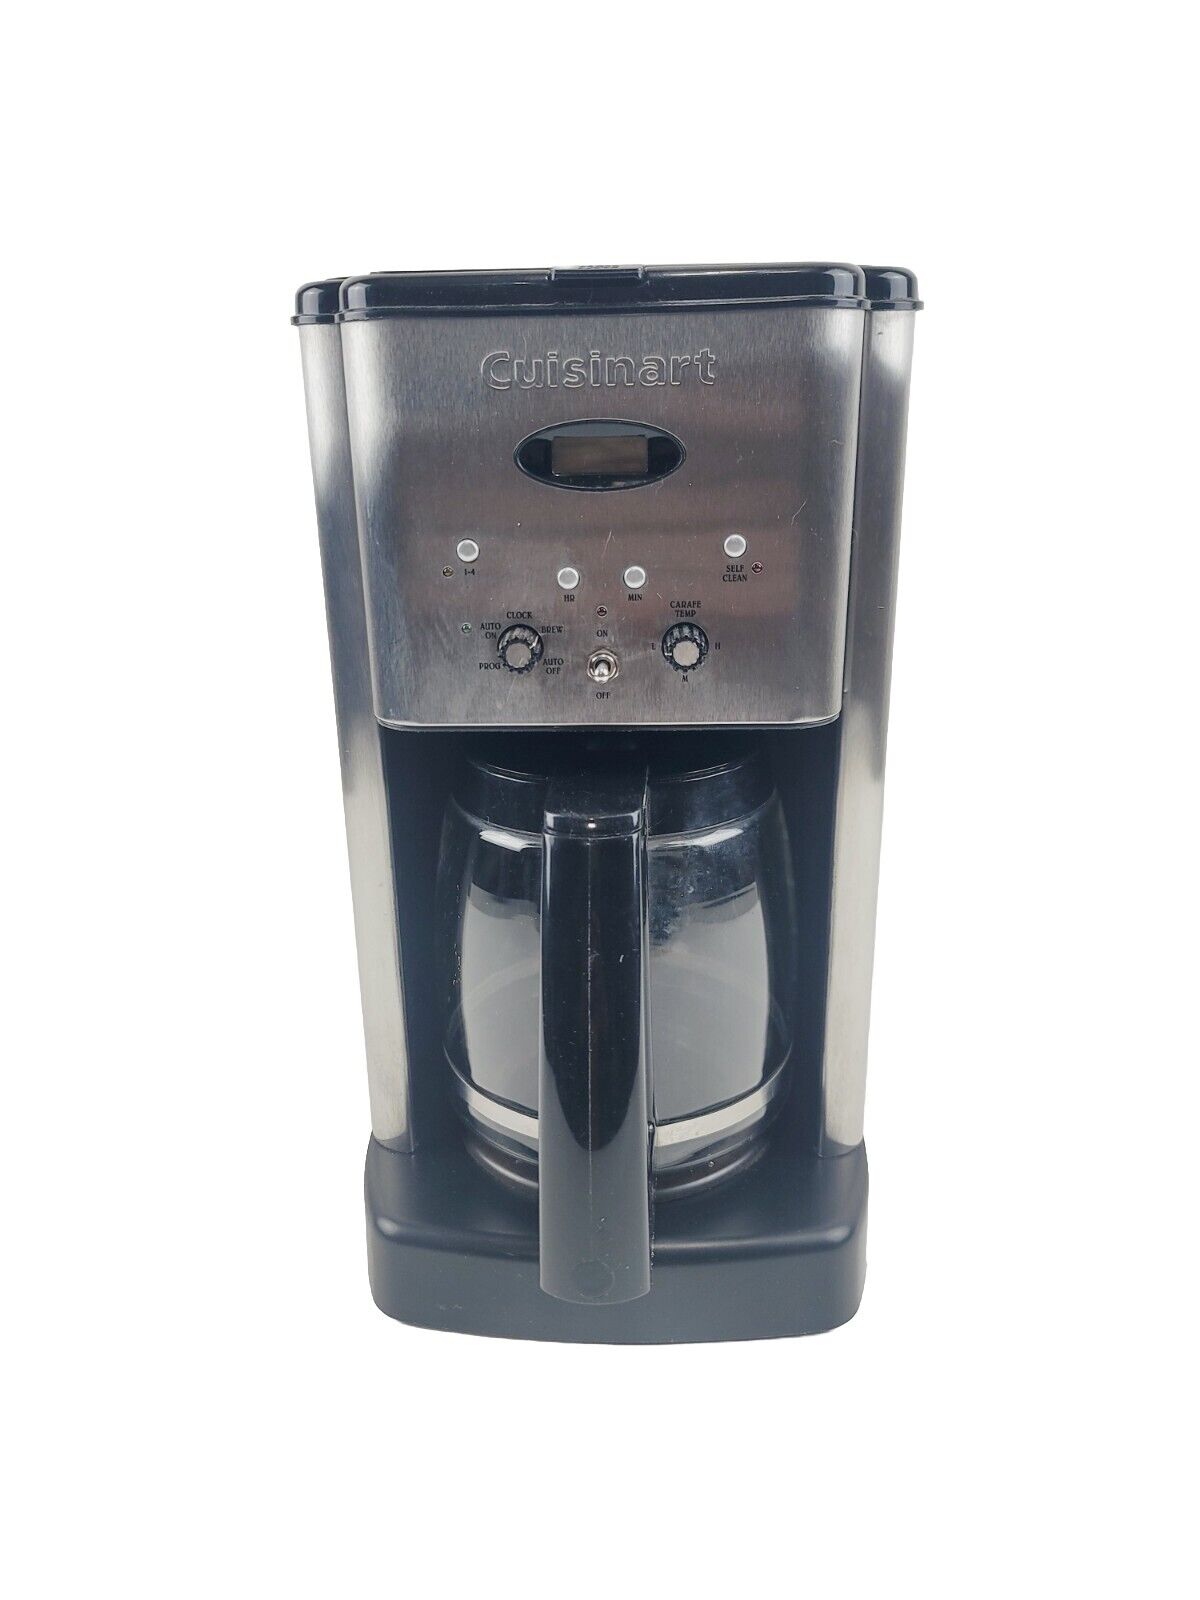 Cuisinart DCC-1200 12-Cup Programmable Coffee Maker - Stainless Steel Pre-owned